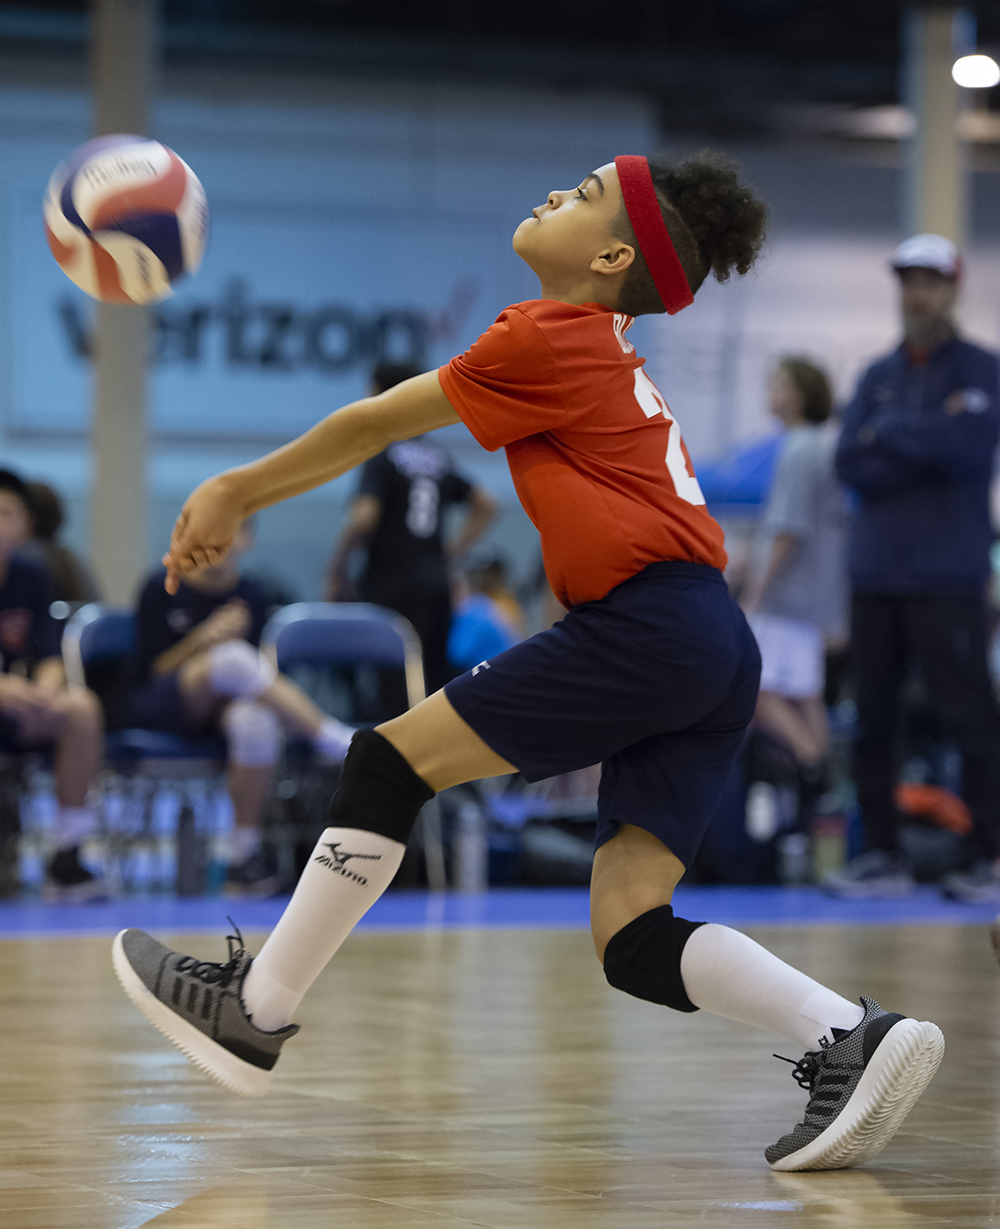 Men volleyball clubs tournaments :: Volleybox